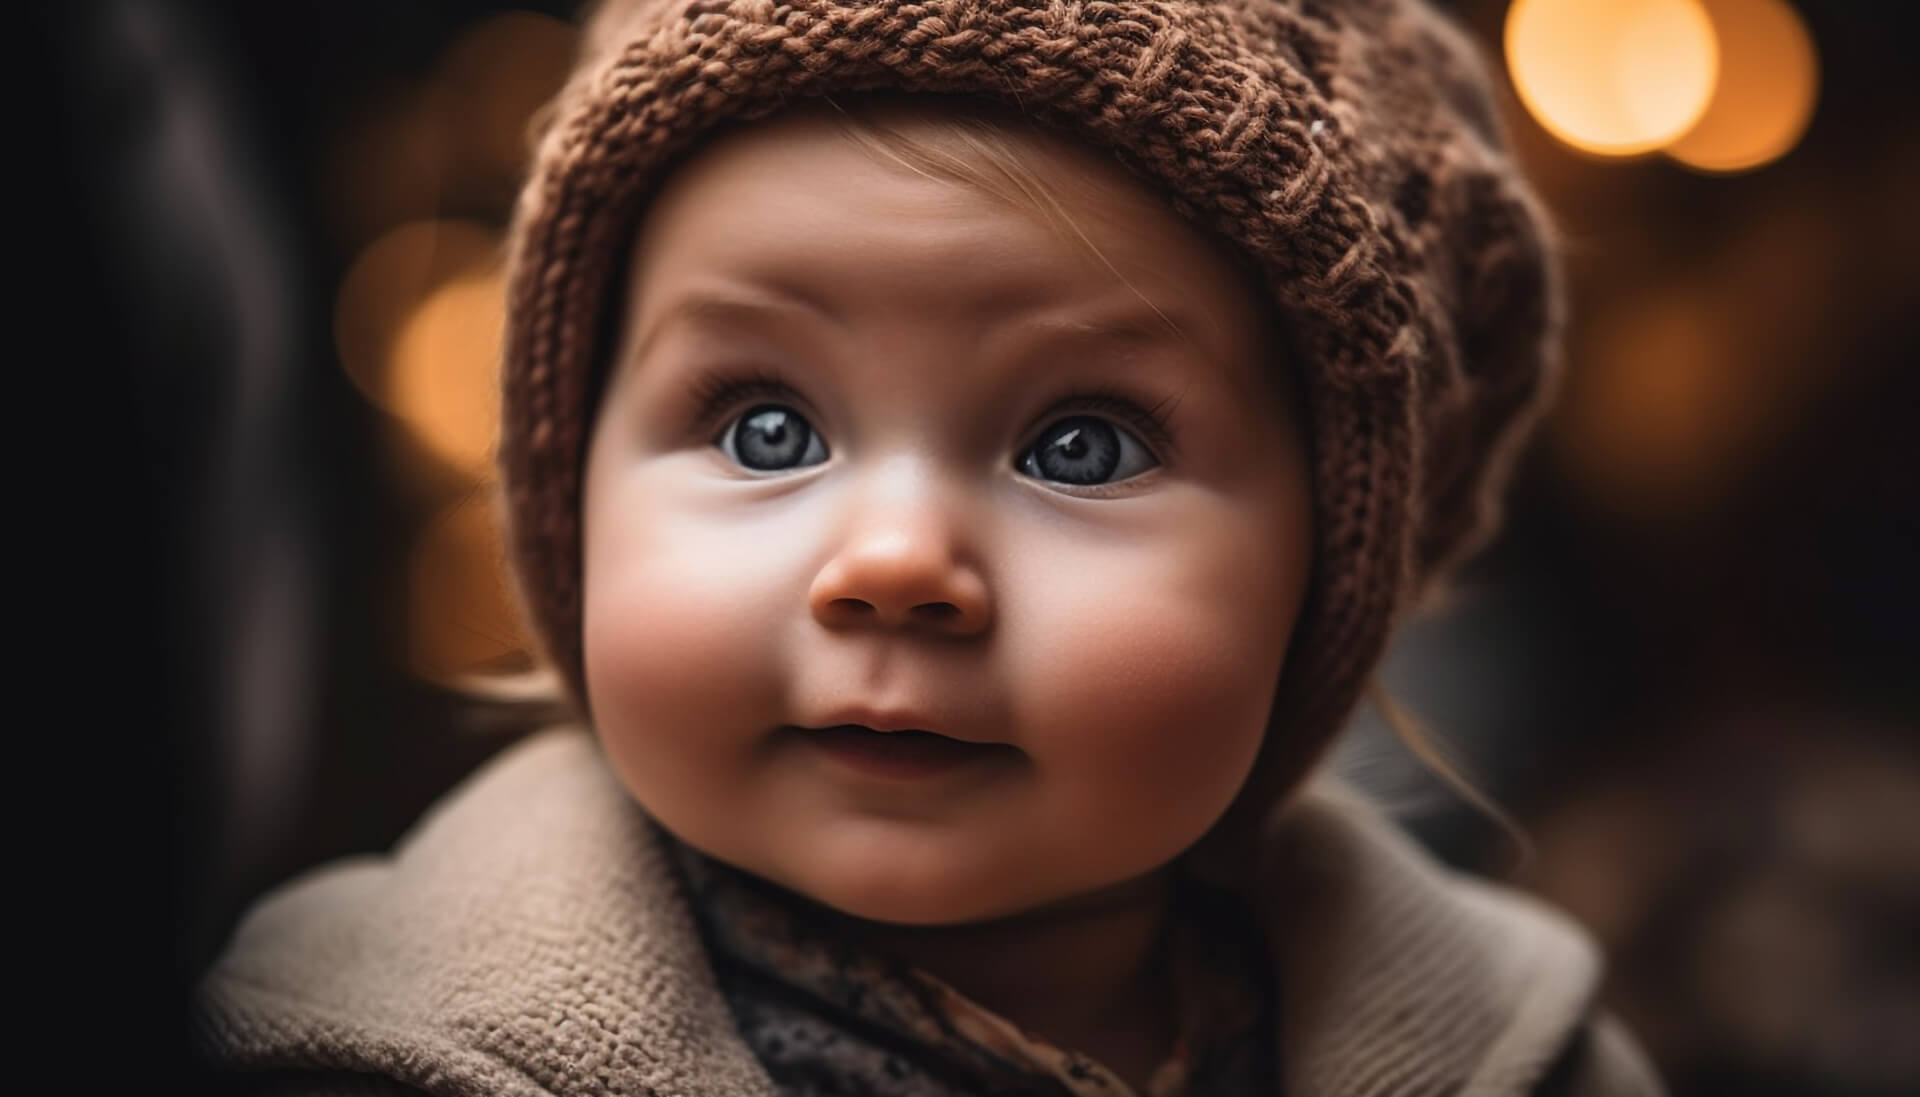 Explore 60 traditional and modern Scottish baby names - 20 for girls, 20 for boys, and 20 unisex. Find the perfect name with a touch of Scottish heritage.